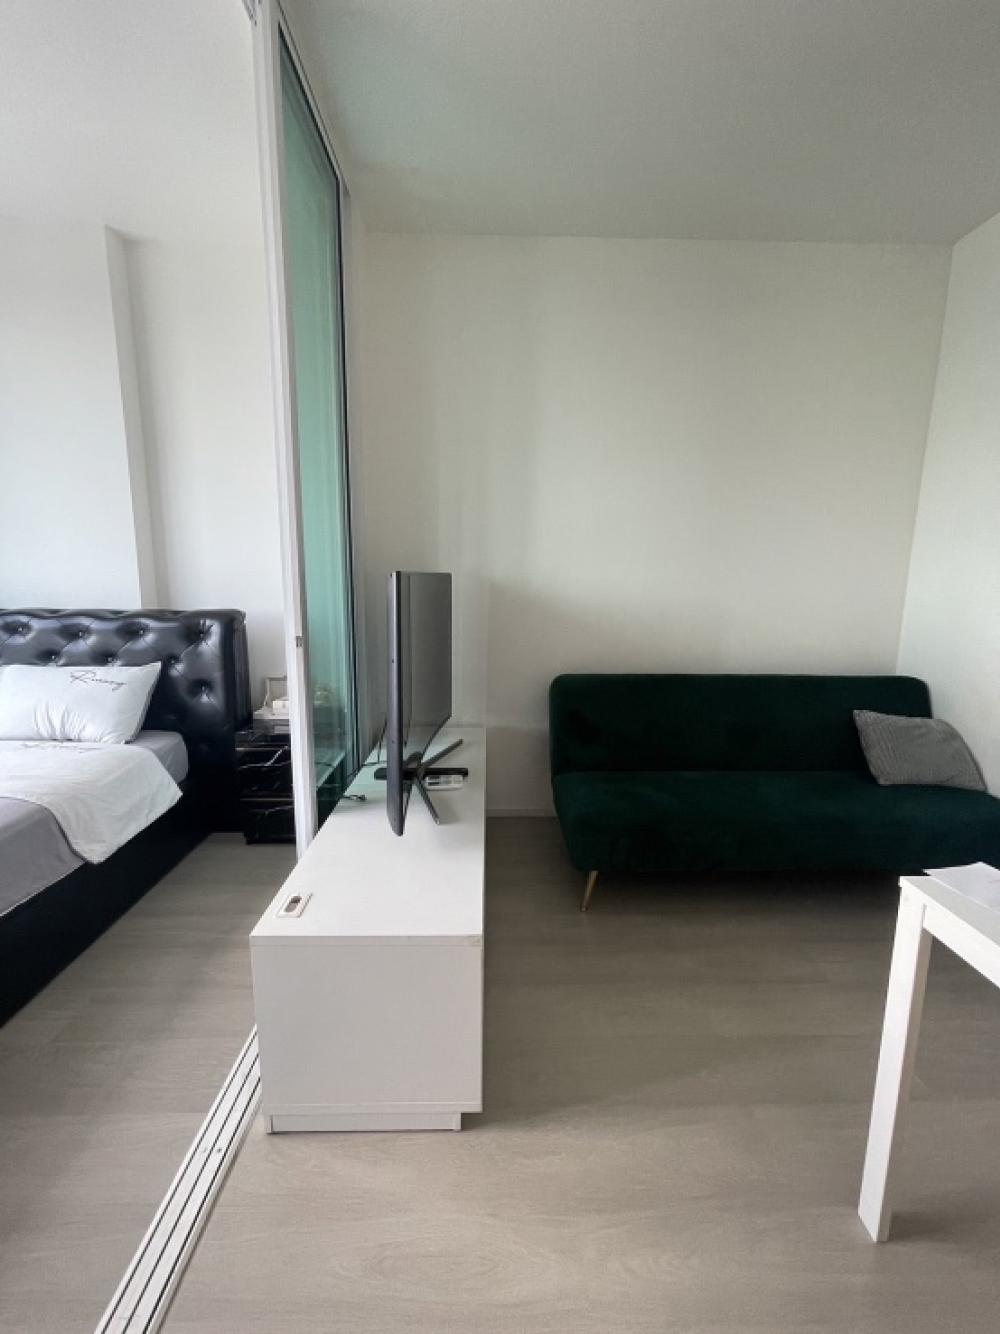 For RentCondoPinklao, Charansanitwong : For rent: Delapis Charan 81, 1 bedroom, MRT Charan Pinklao, available room, ready to move in immediately. You can make an appointment to see the actual room every day. Tel:086-888-9328